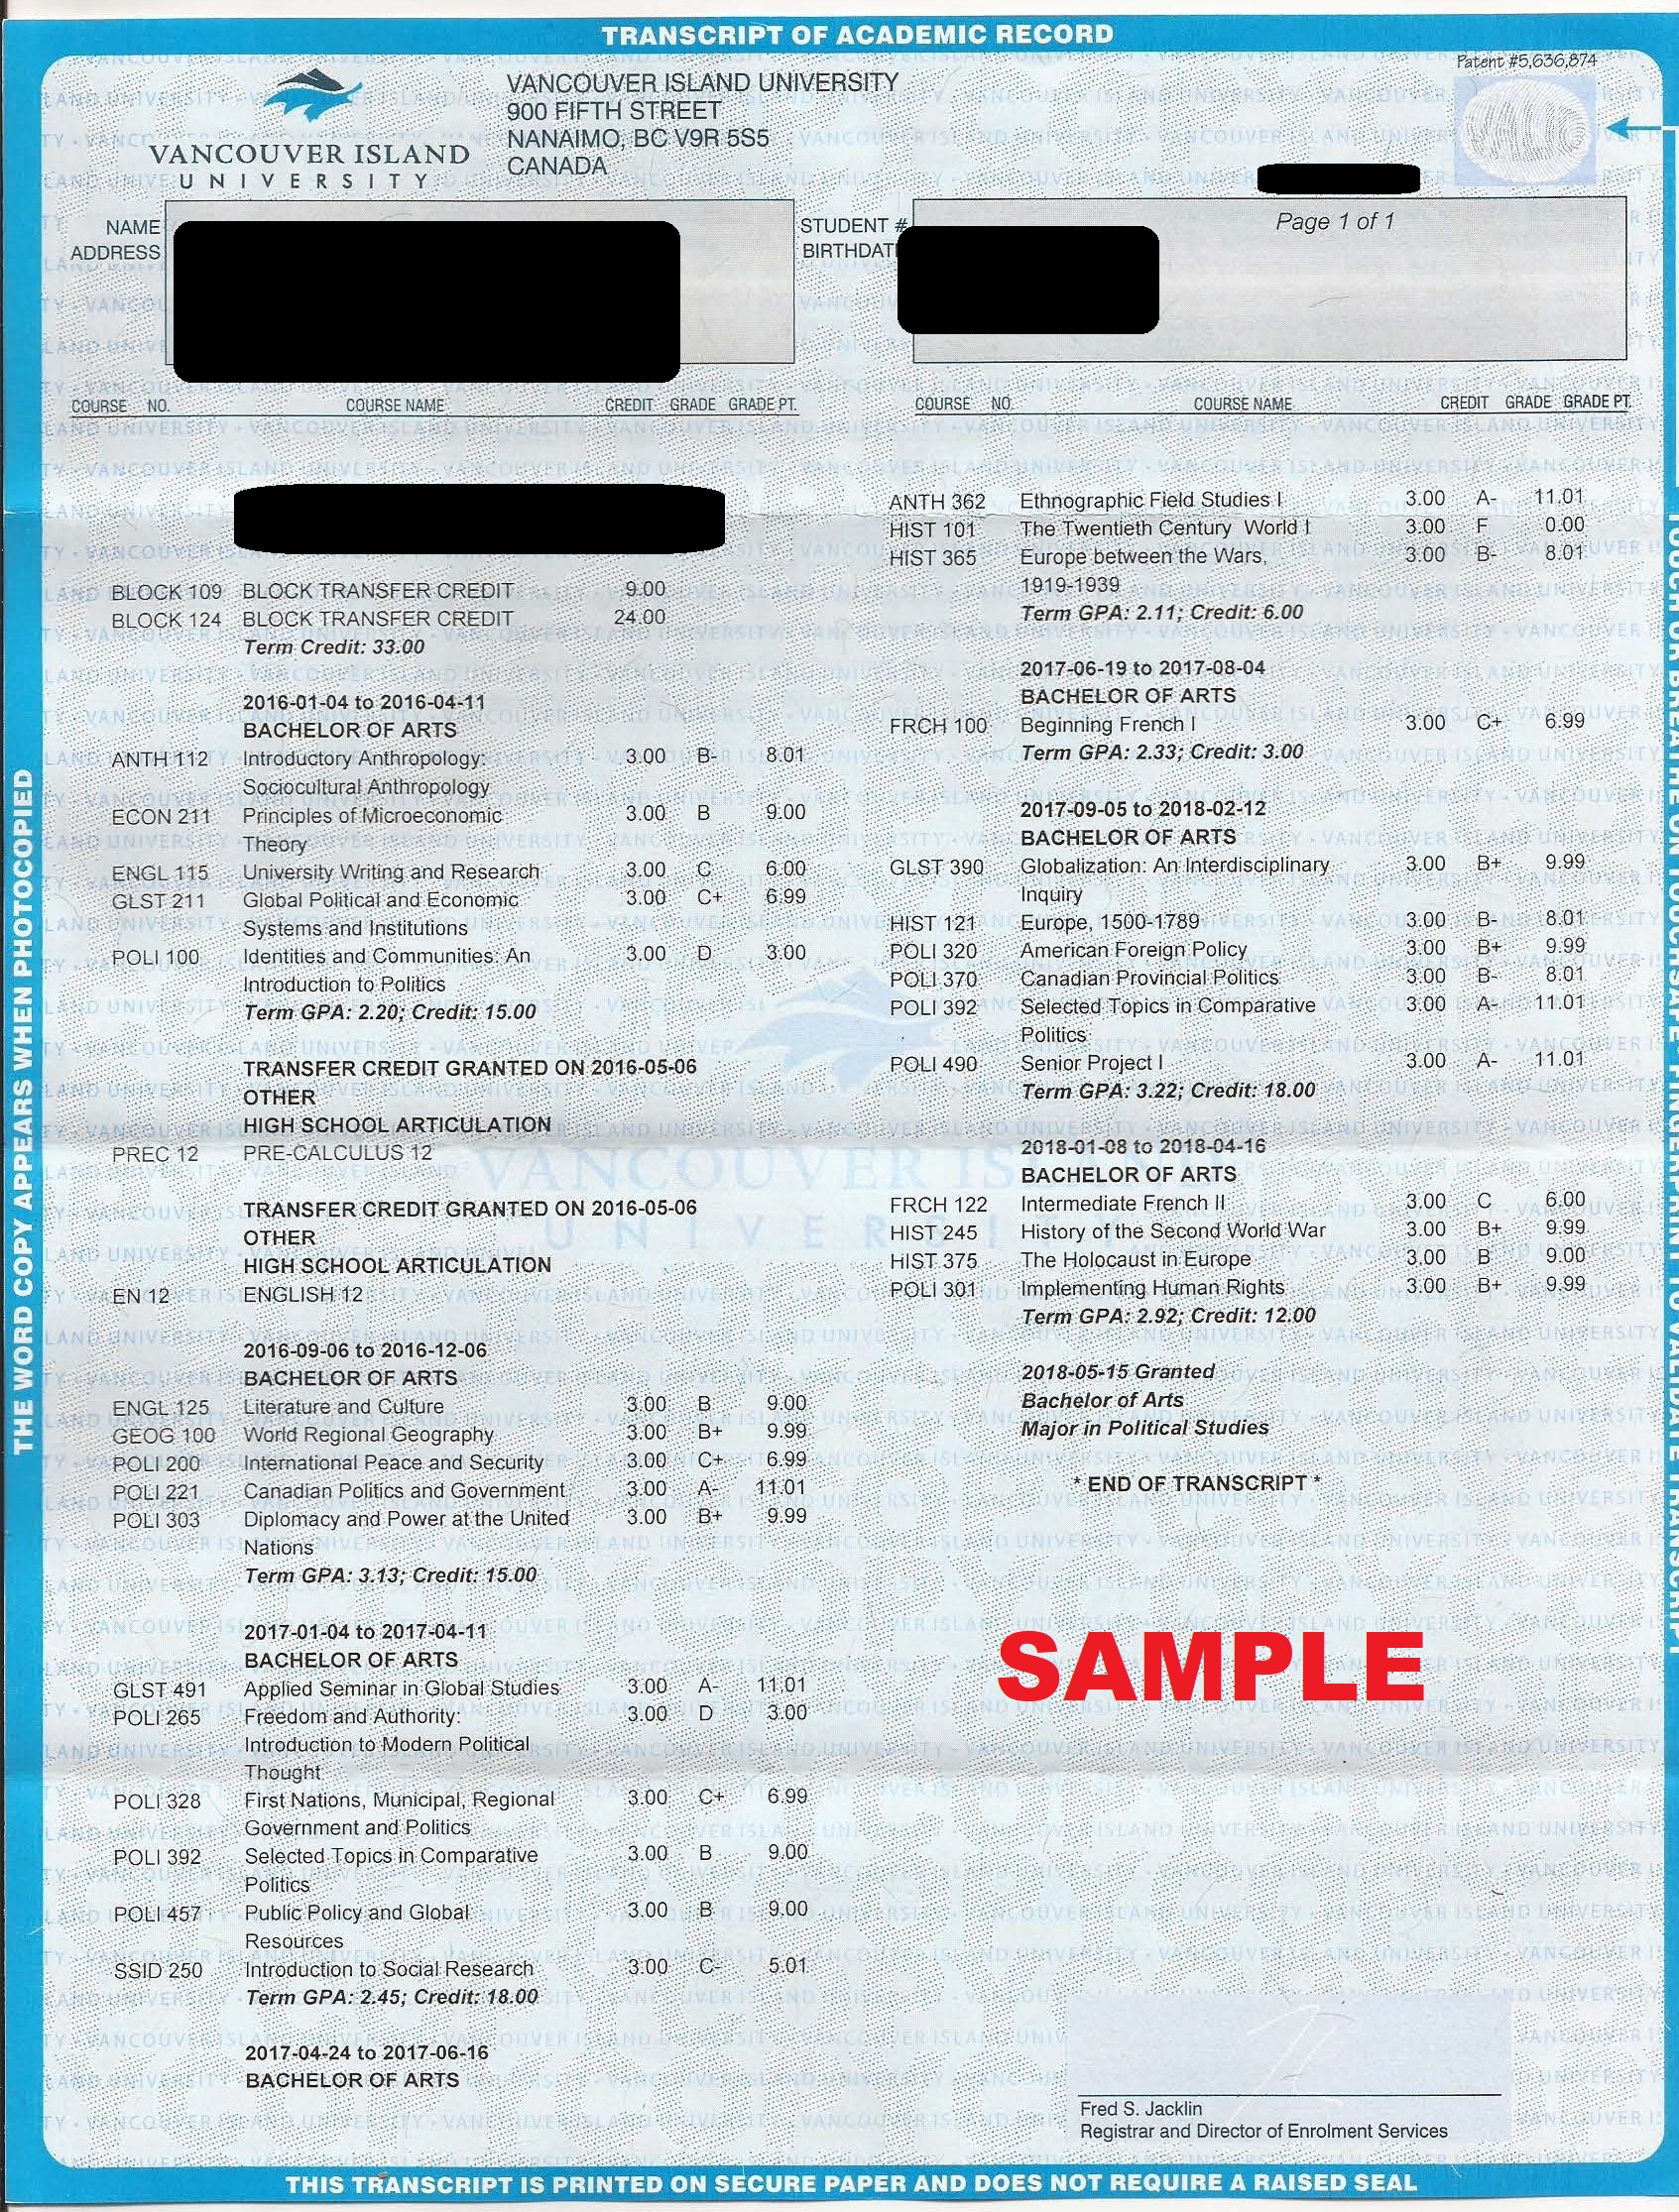 Sample image of a post secondary transcript issued by a BC public education institution